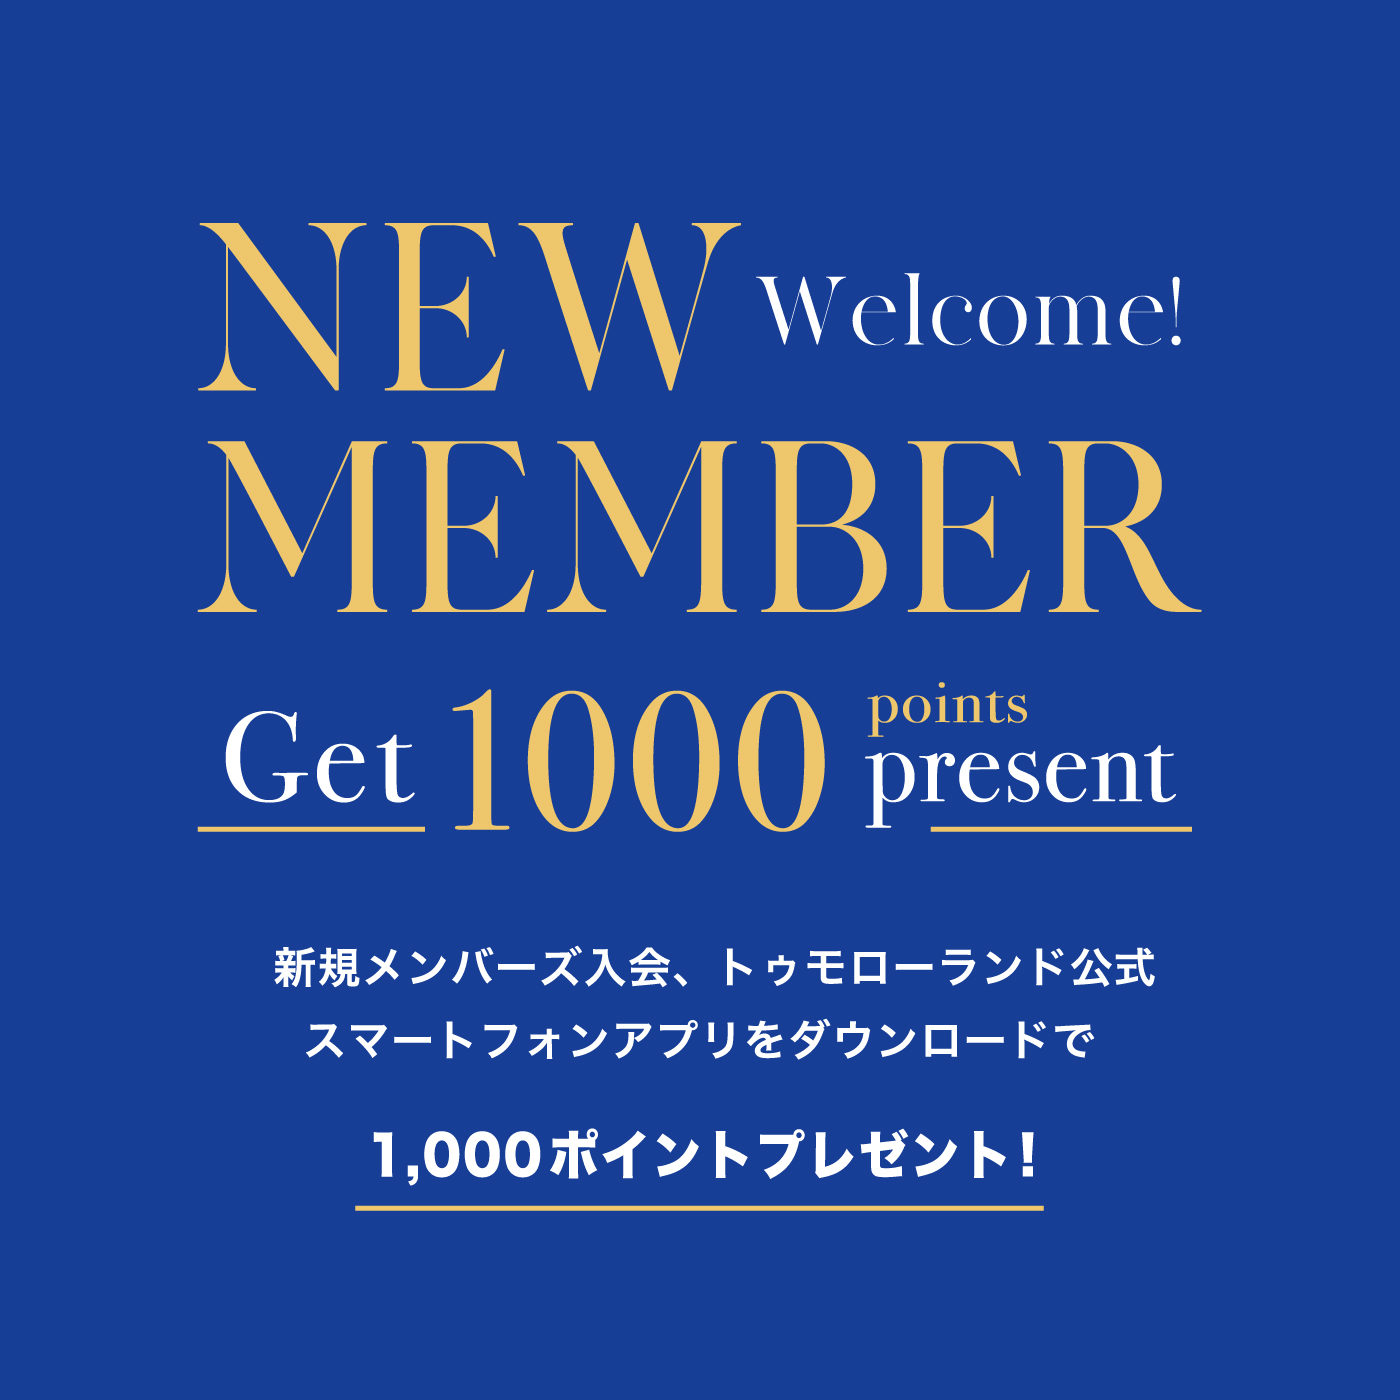 NEW MEMBER Get 1000 points present